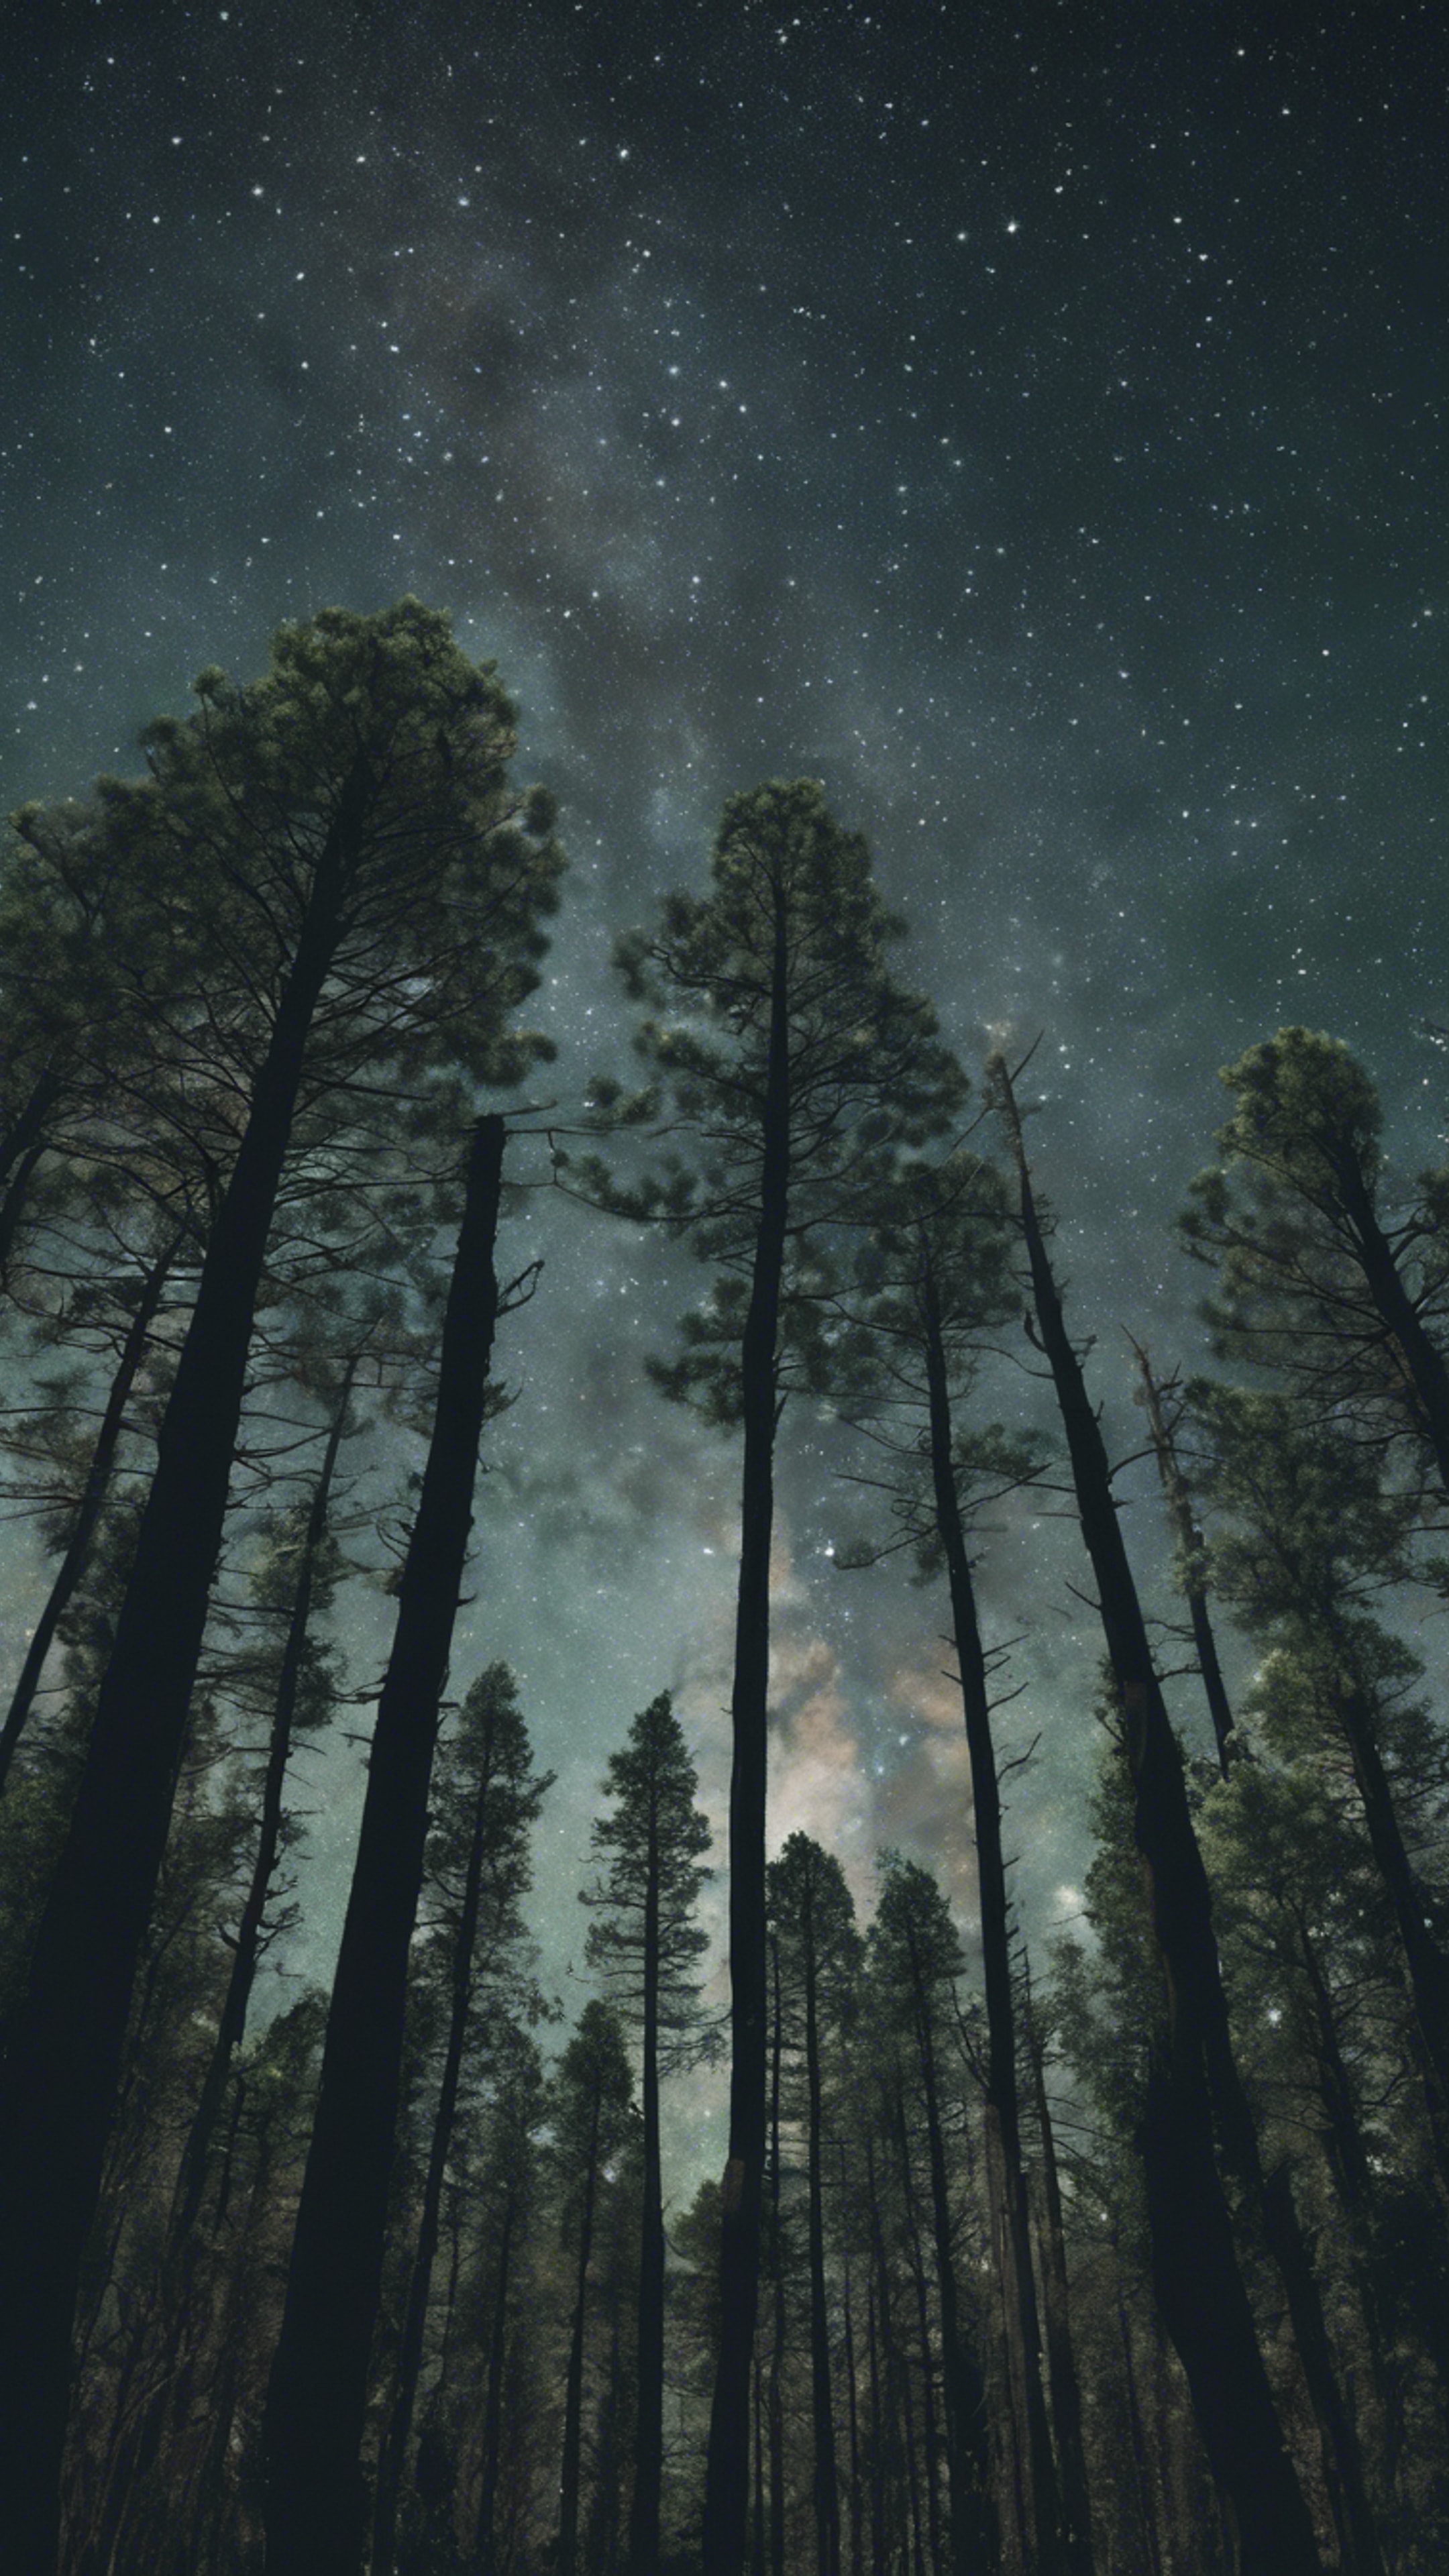 A wilderness scene with tall, dark green pine trees occluding the stars. Tapetai[a450718e497a48169b60]